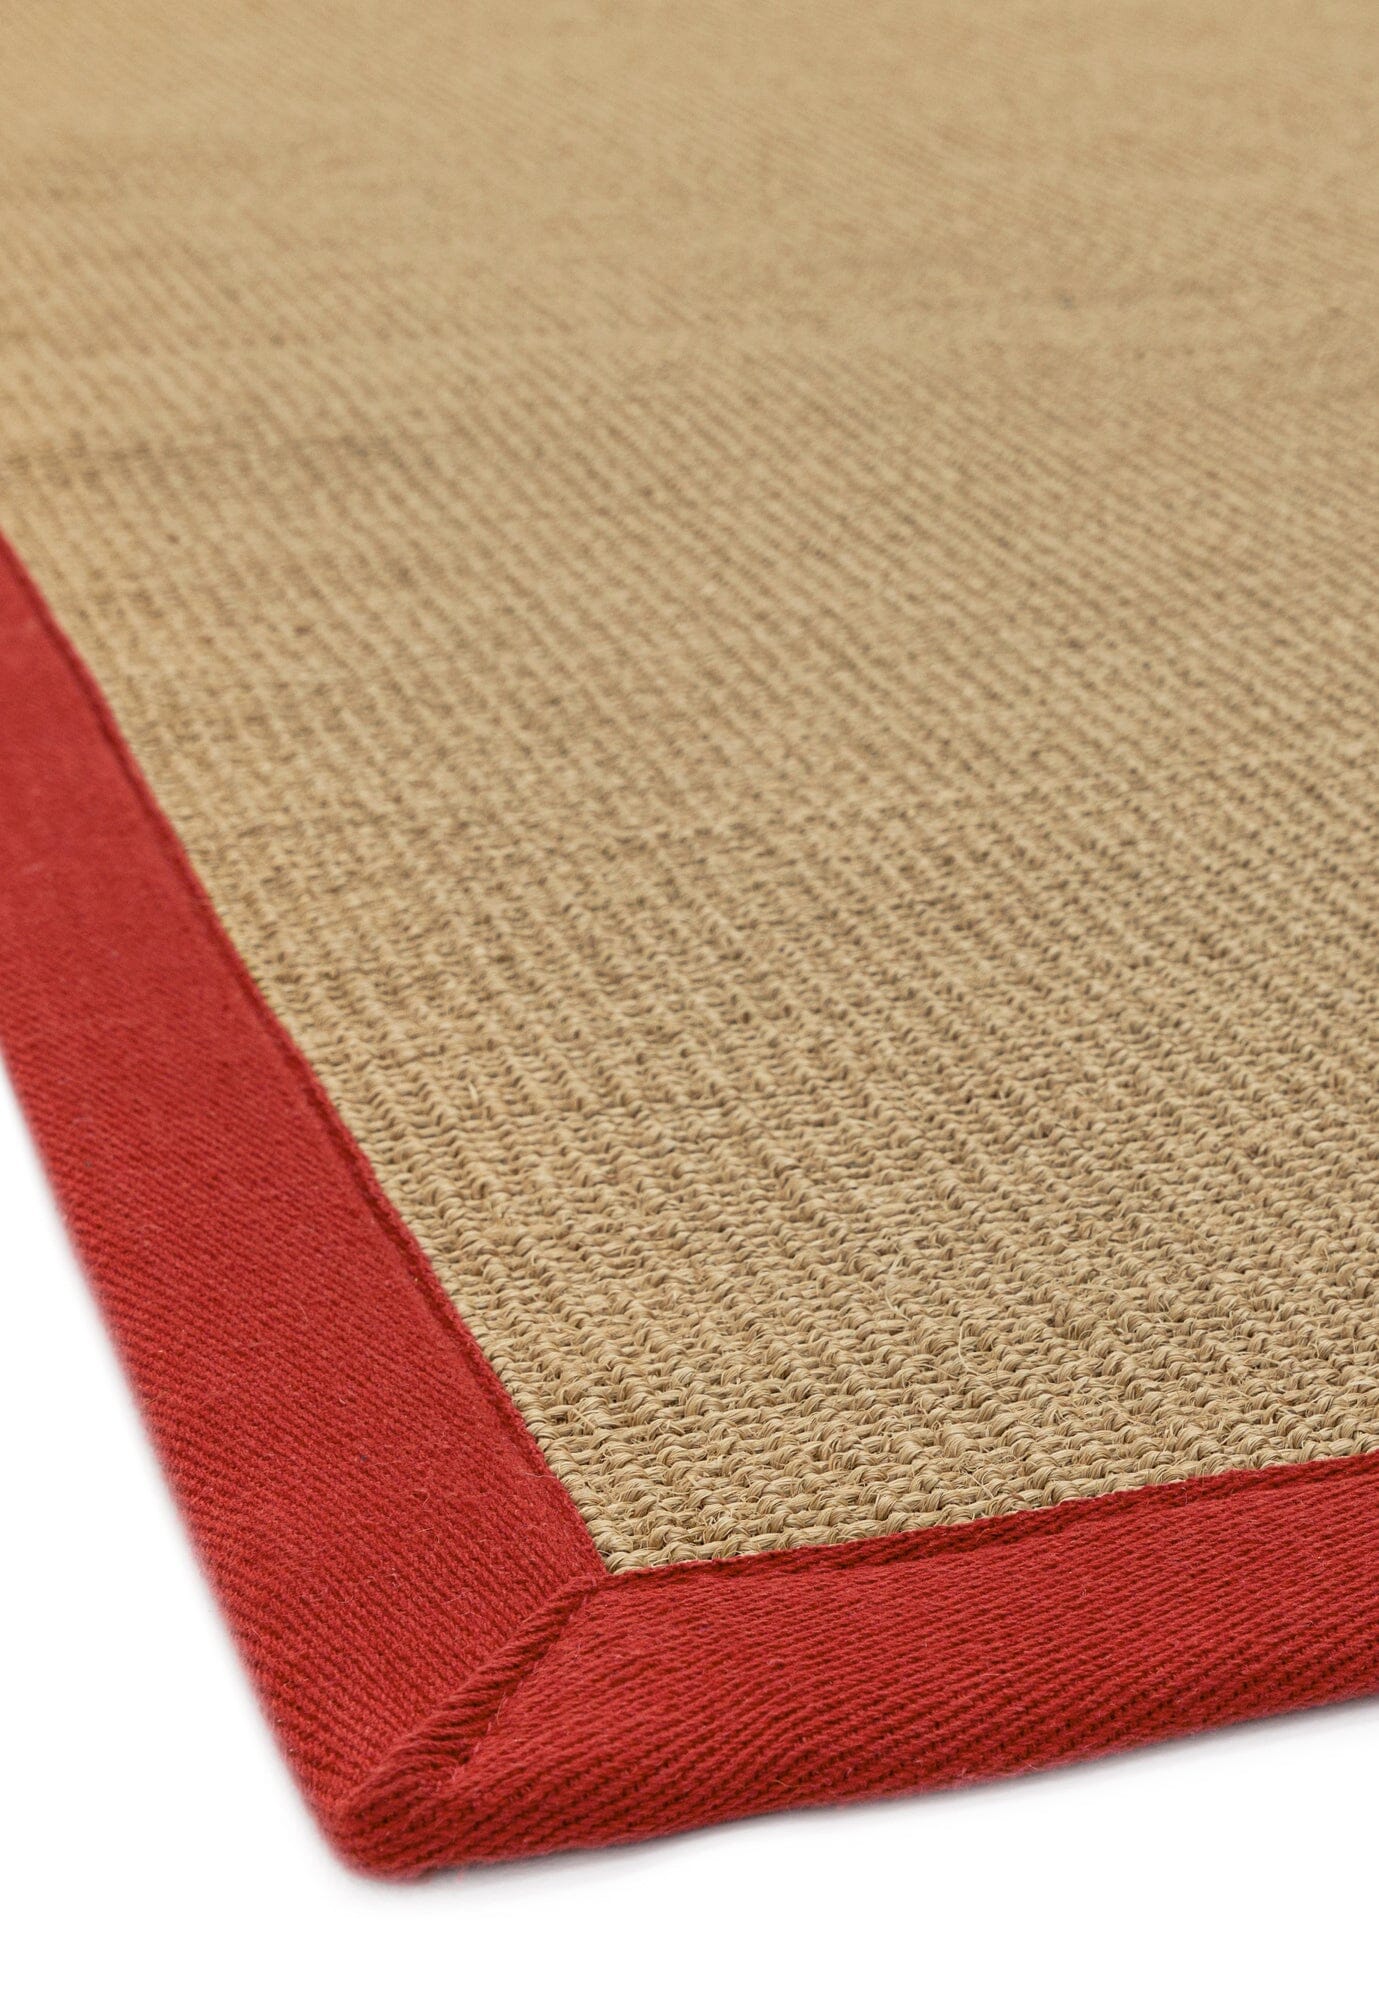 Asiatic Carpets Sisal Machine Woven Rug Linen/Red - 120 x 180cm